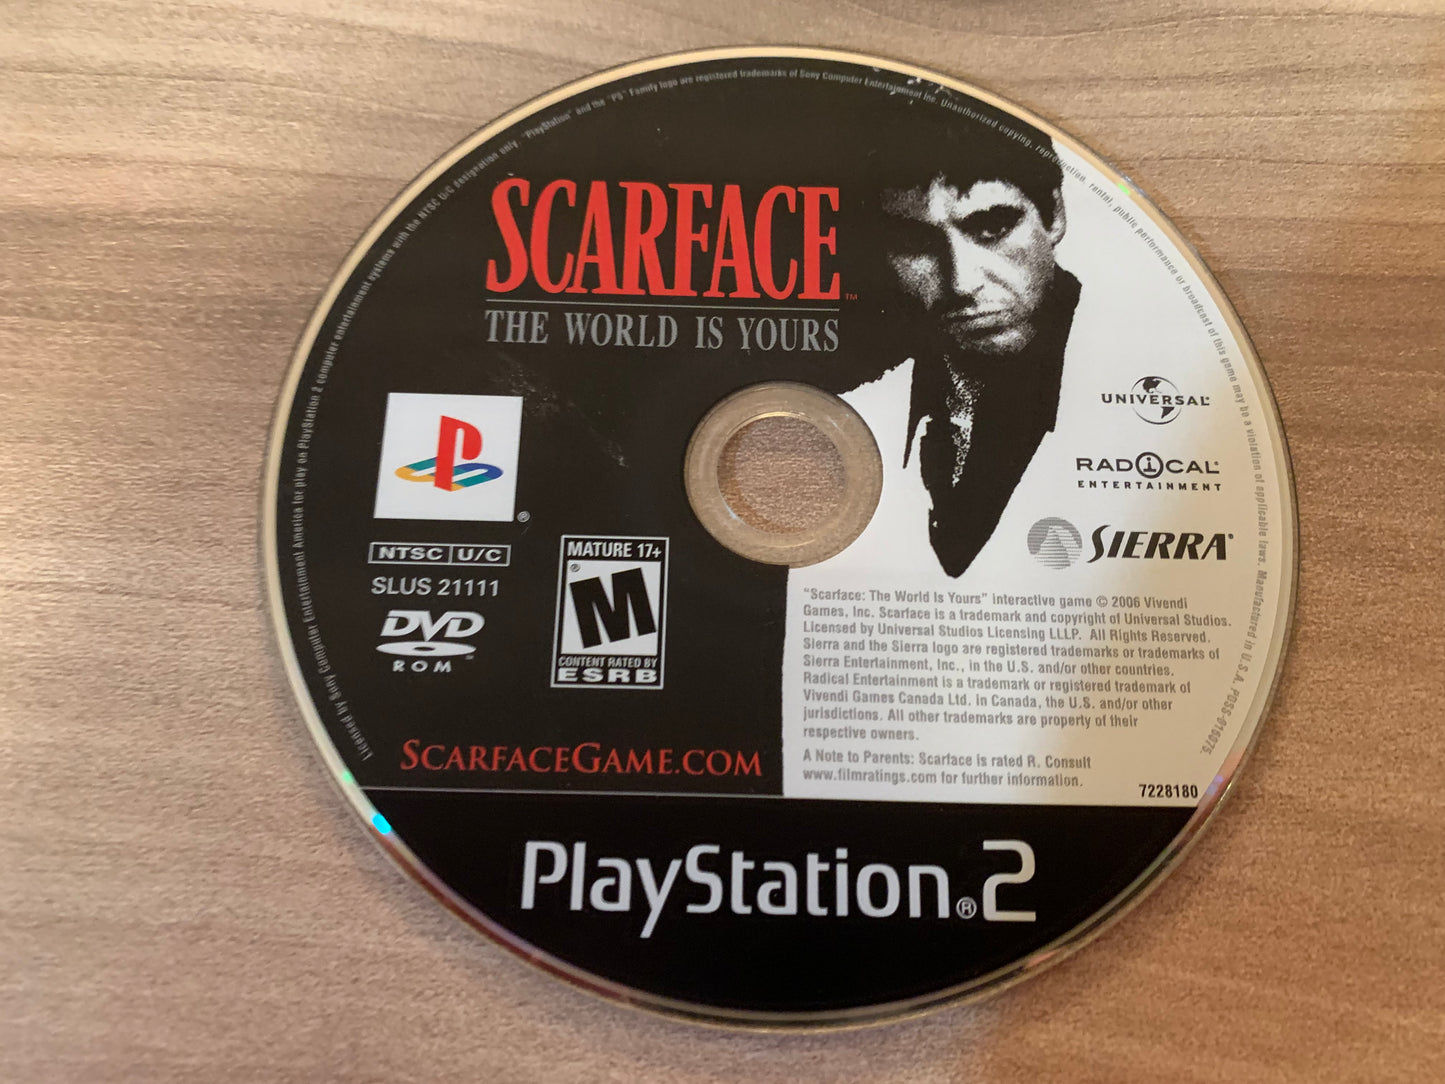 SONY PLAYSTATiON 2 [PS2] | SCARFACE THE WORLD iS YOURS